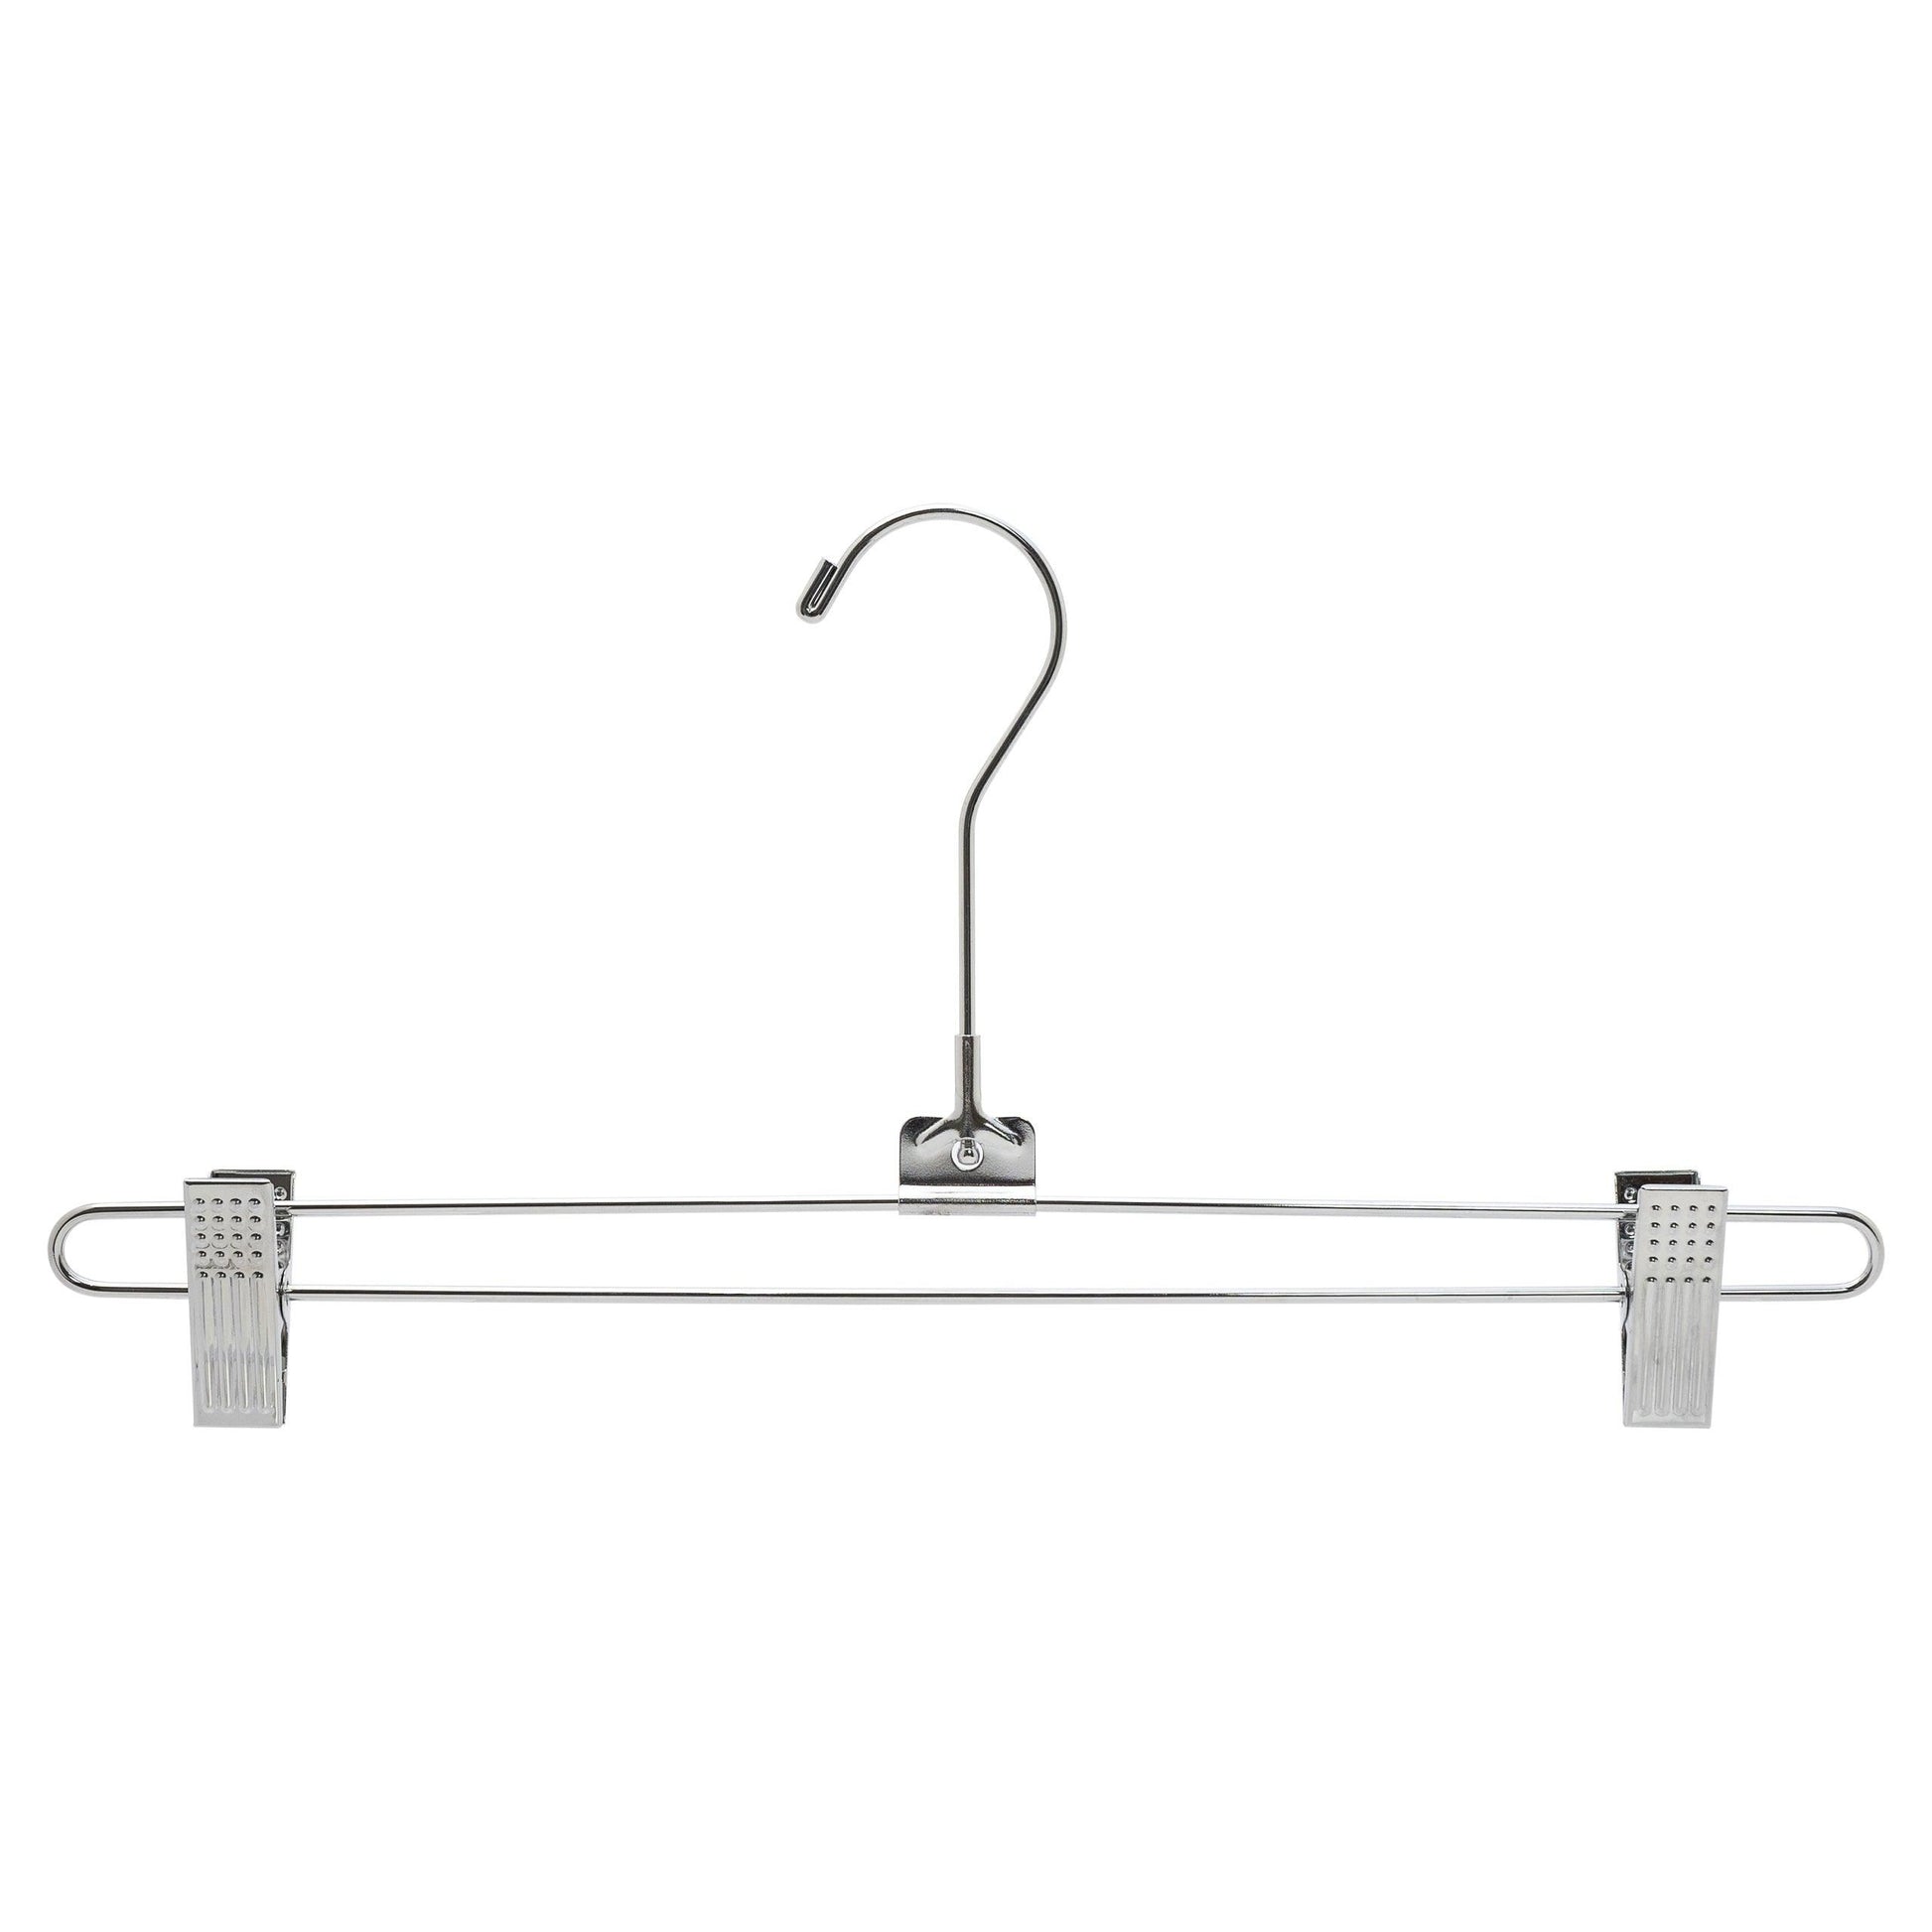 Metal Pant/Skirt Hanger With Clips - 35.5cm X 3.5mm Thick  - (Sold in Bundles of 25/50/100) - Hangersforless